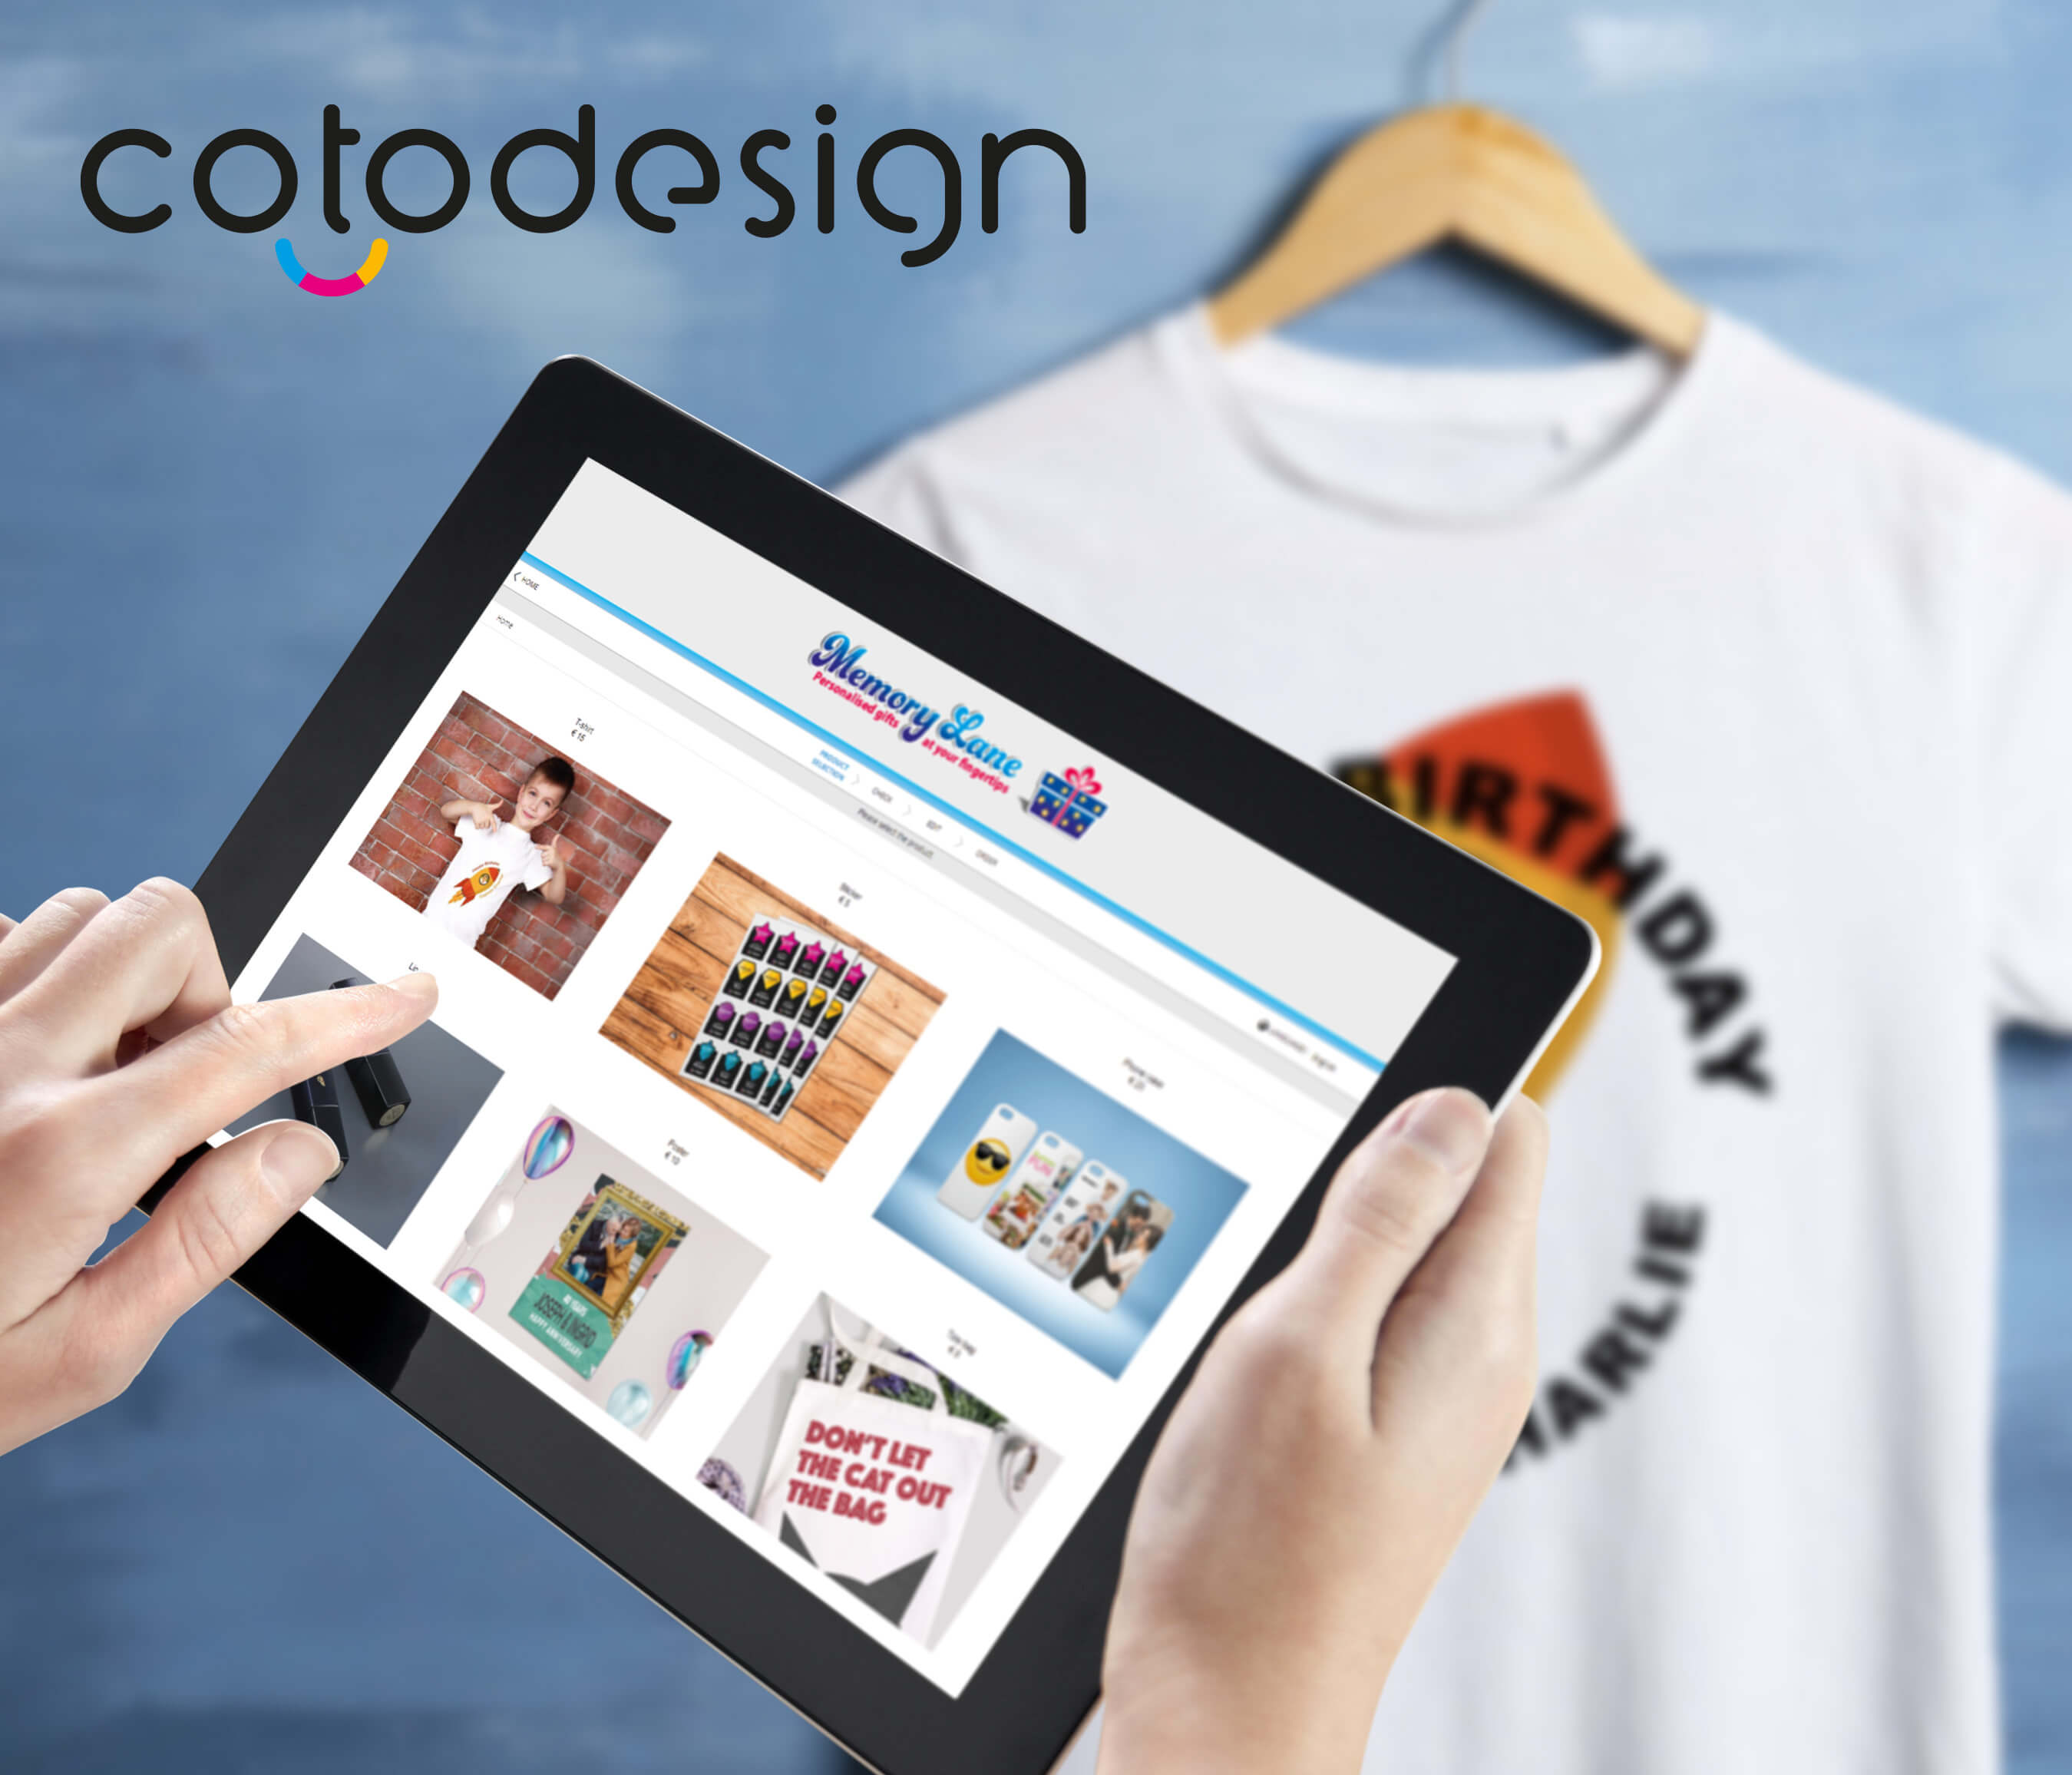 Roland's innovative cotodesign software package for in-store product personalization and customization is now available in North and South America.